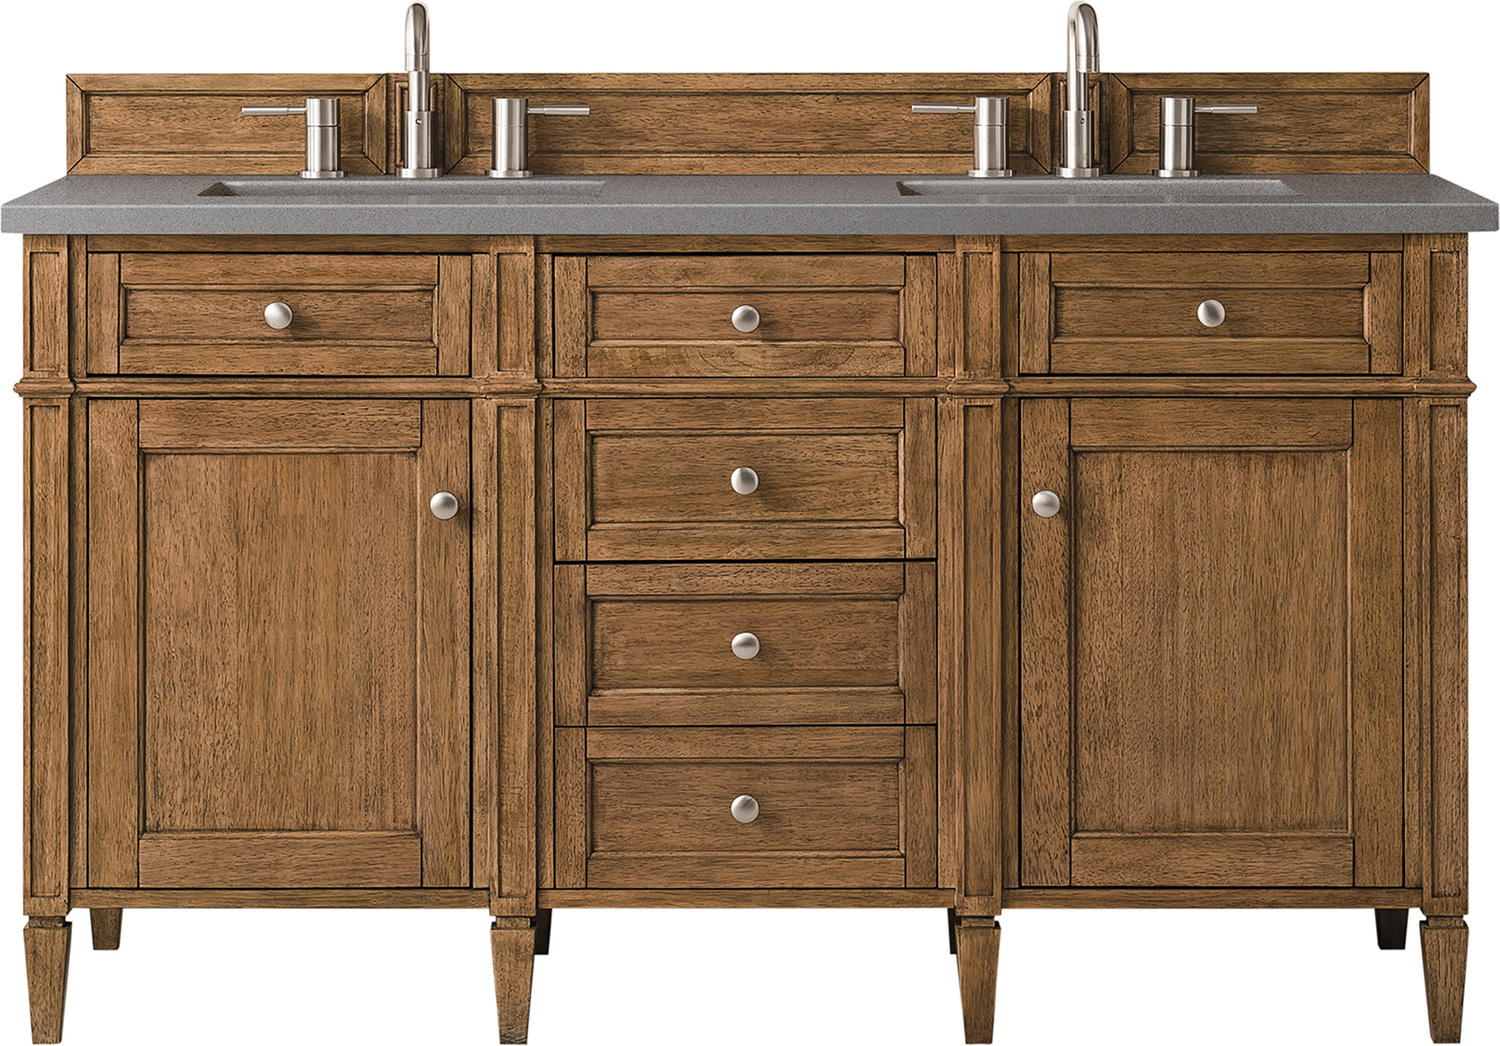 72 inch double vanity James Martin Vanity Saddle Brown Transitional